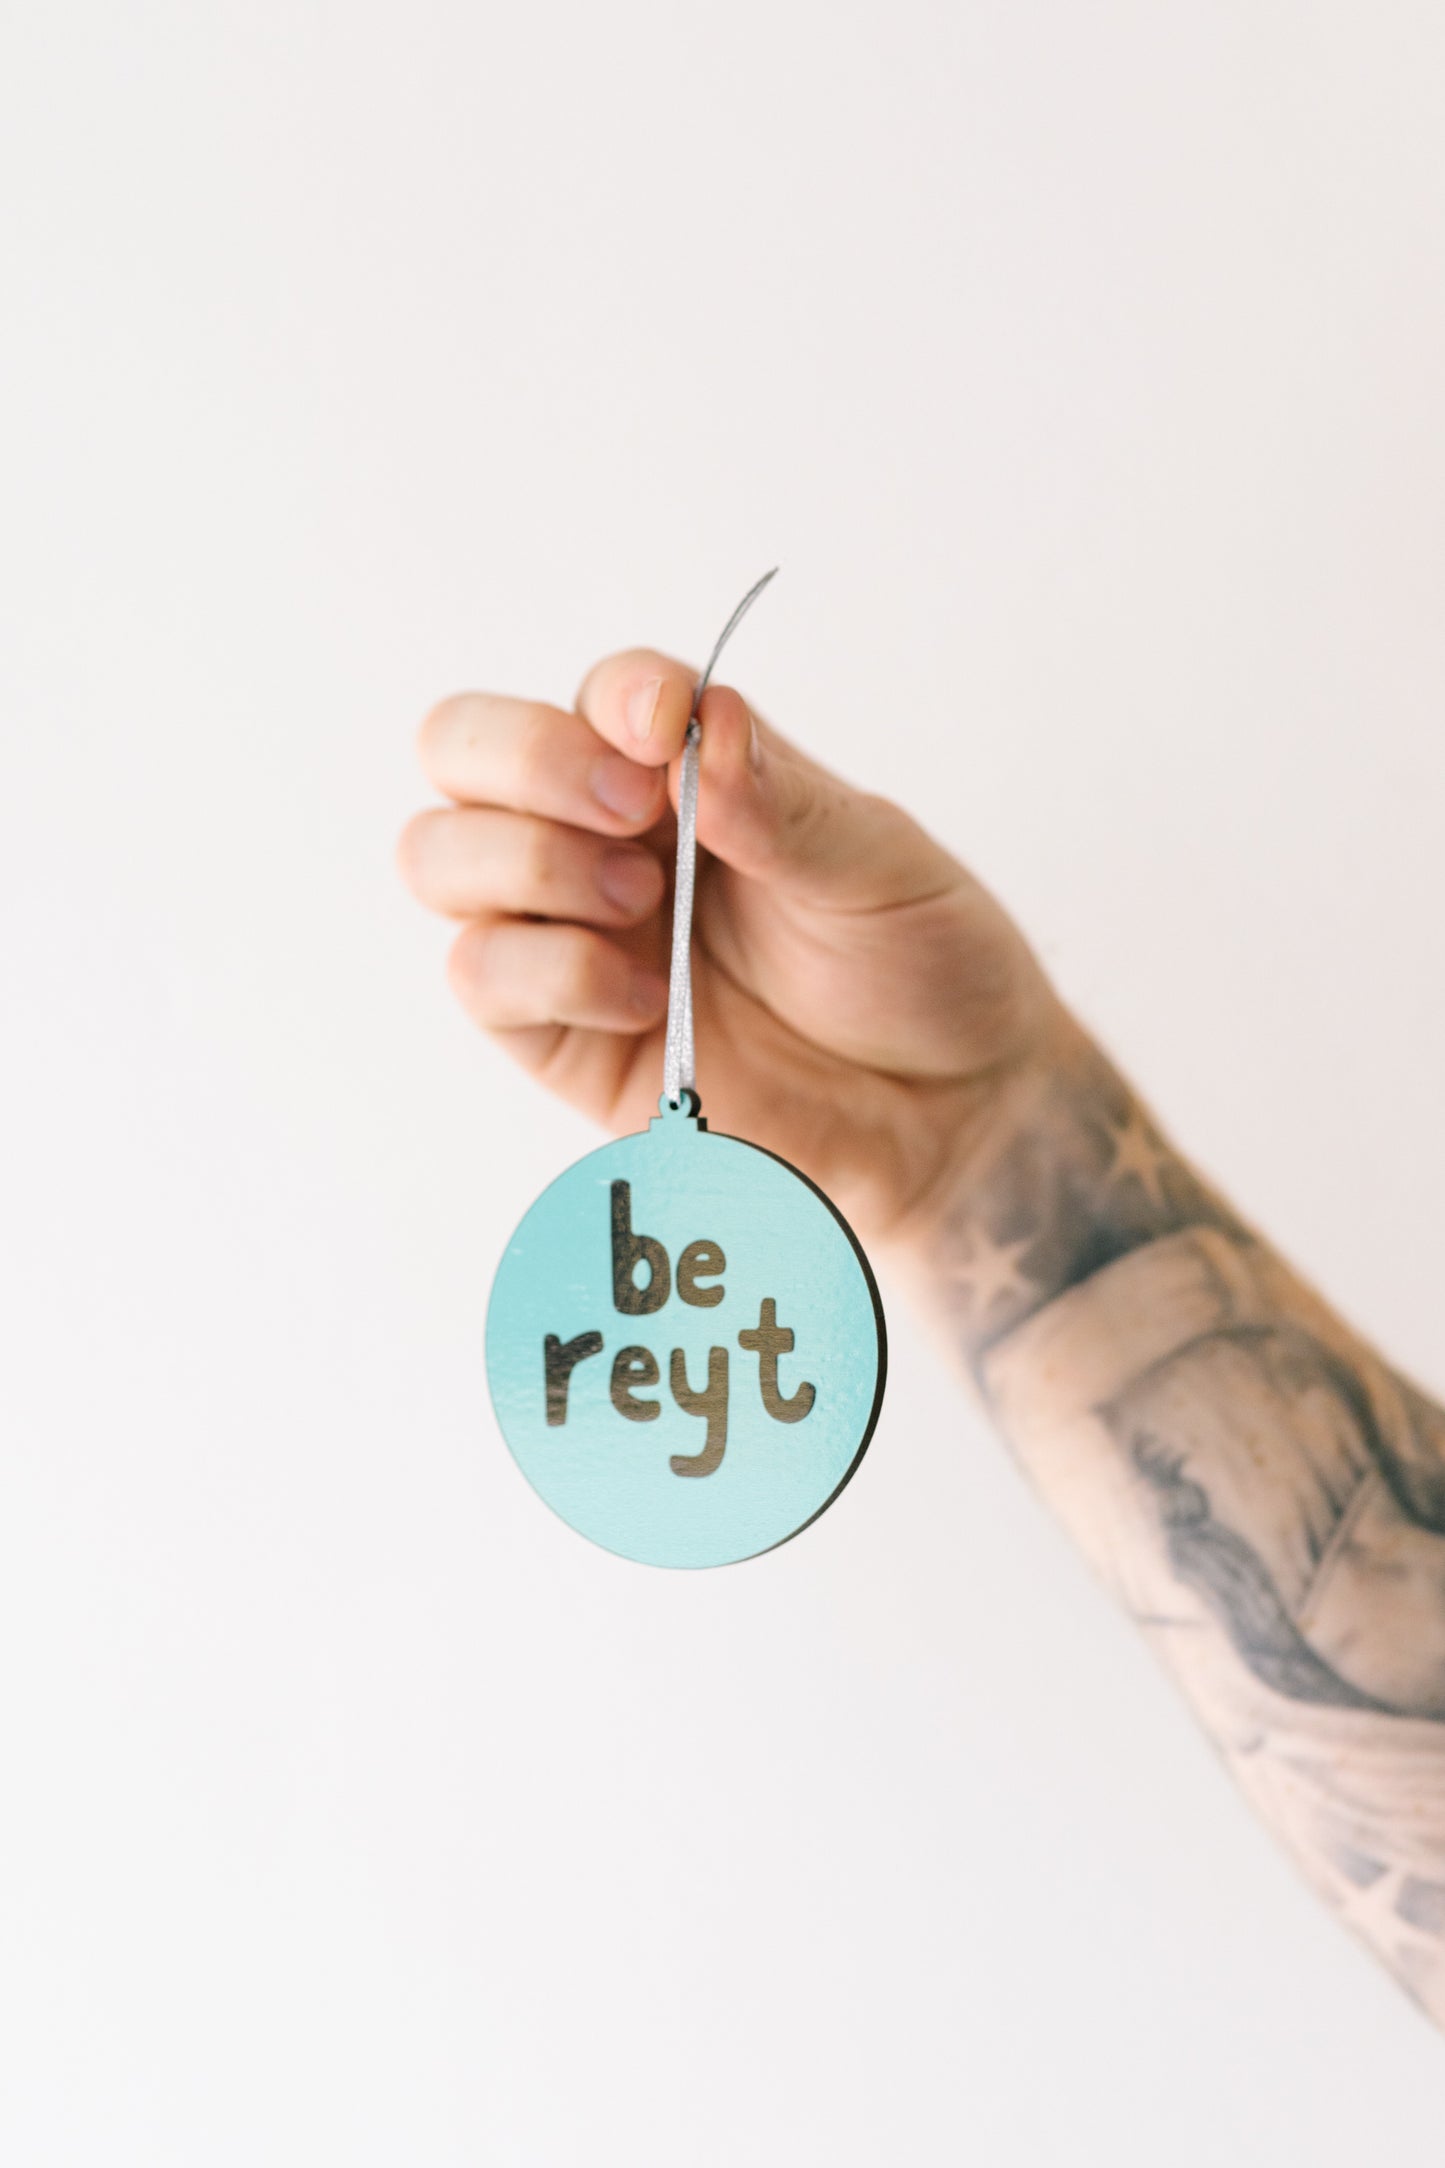 Be Reyt - Christmas Bauble